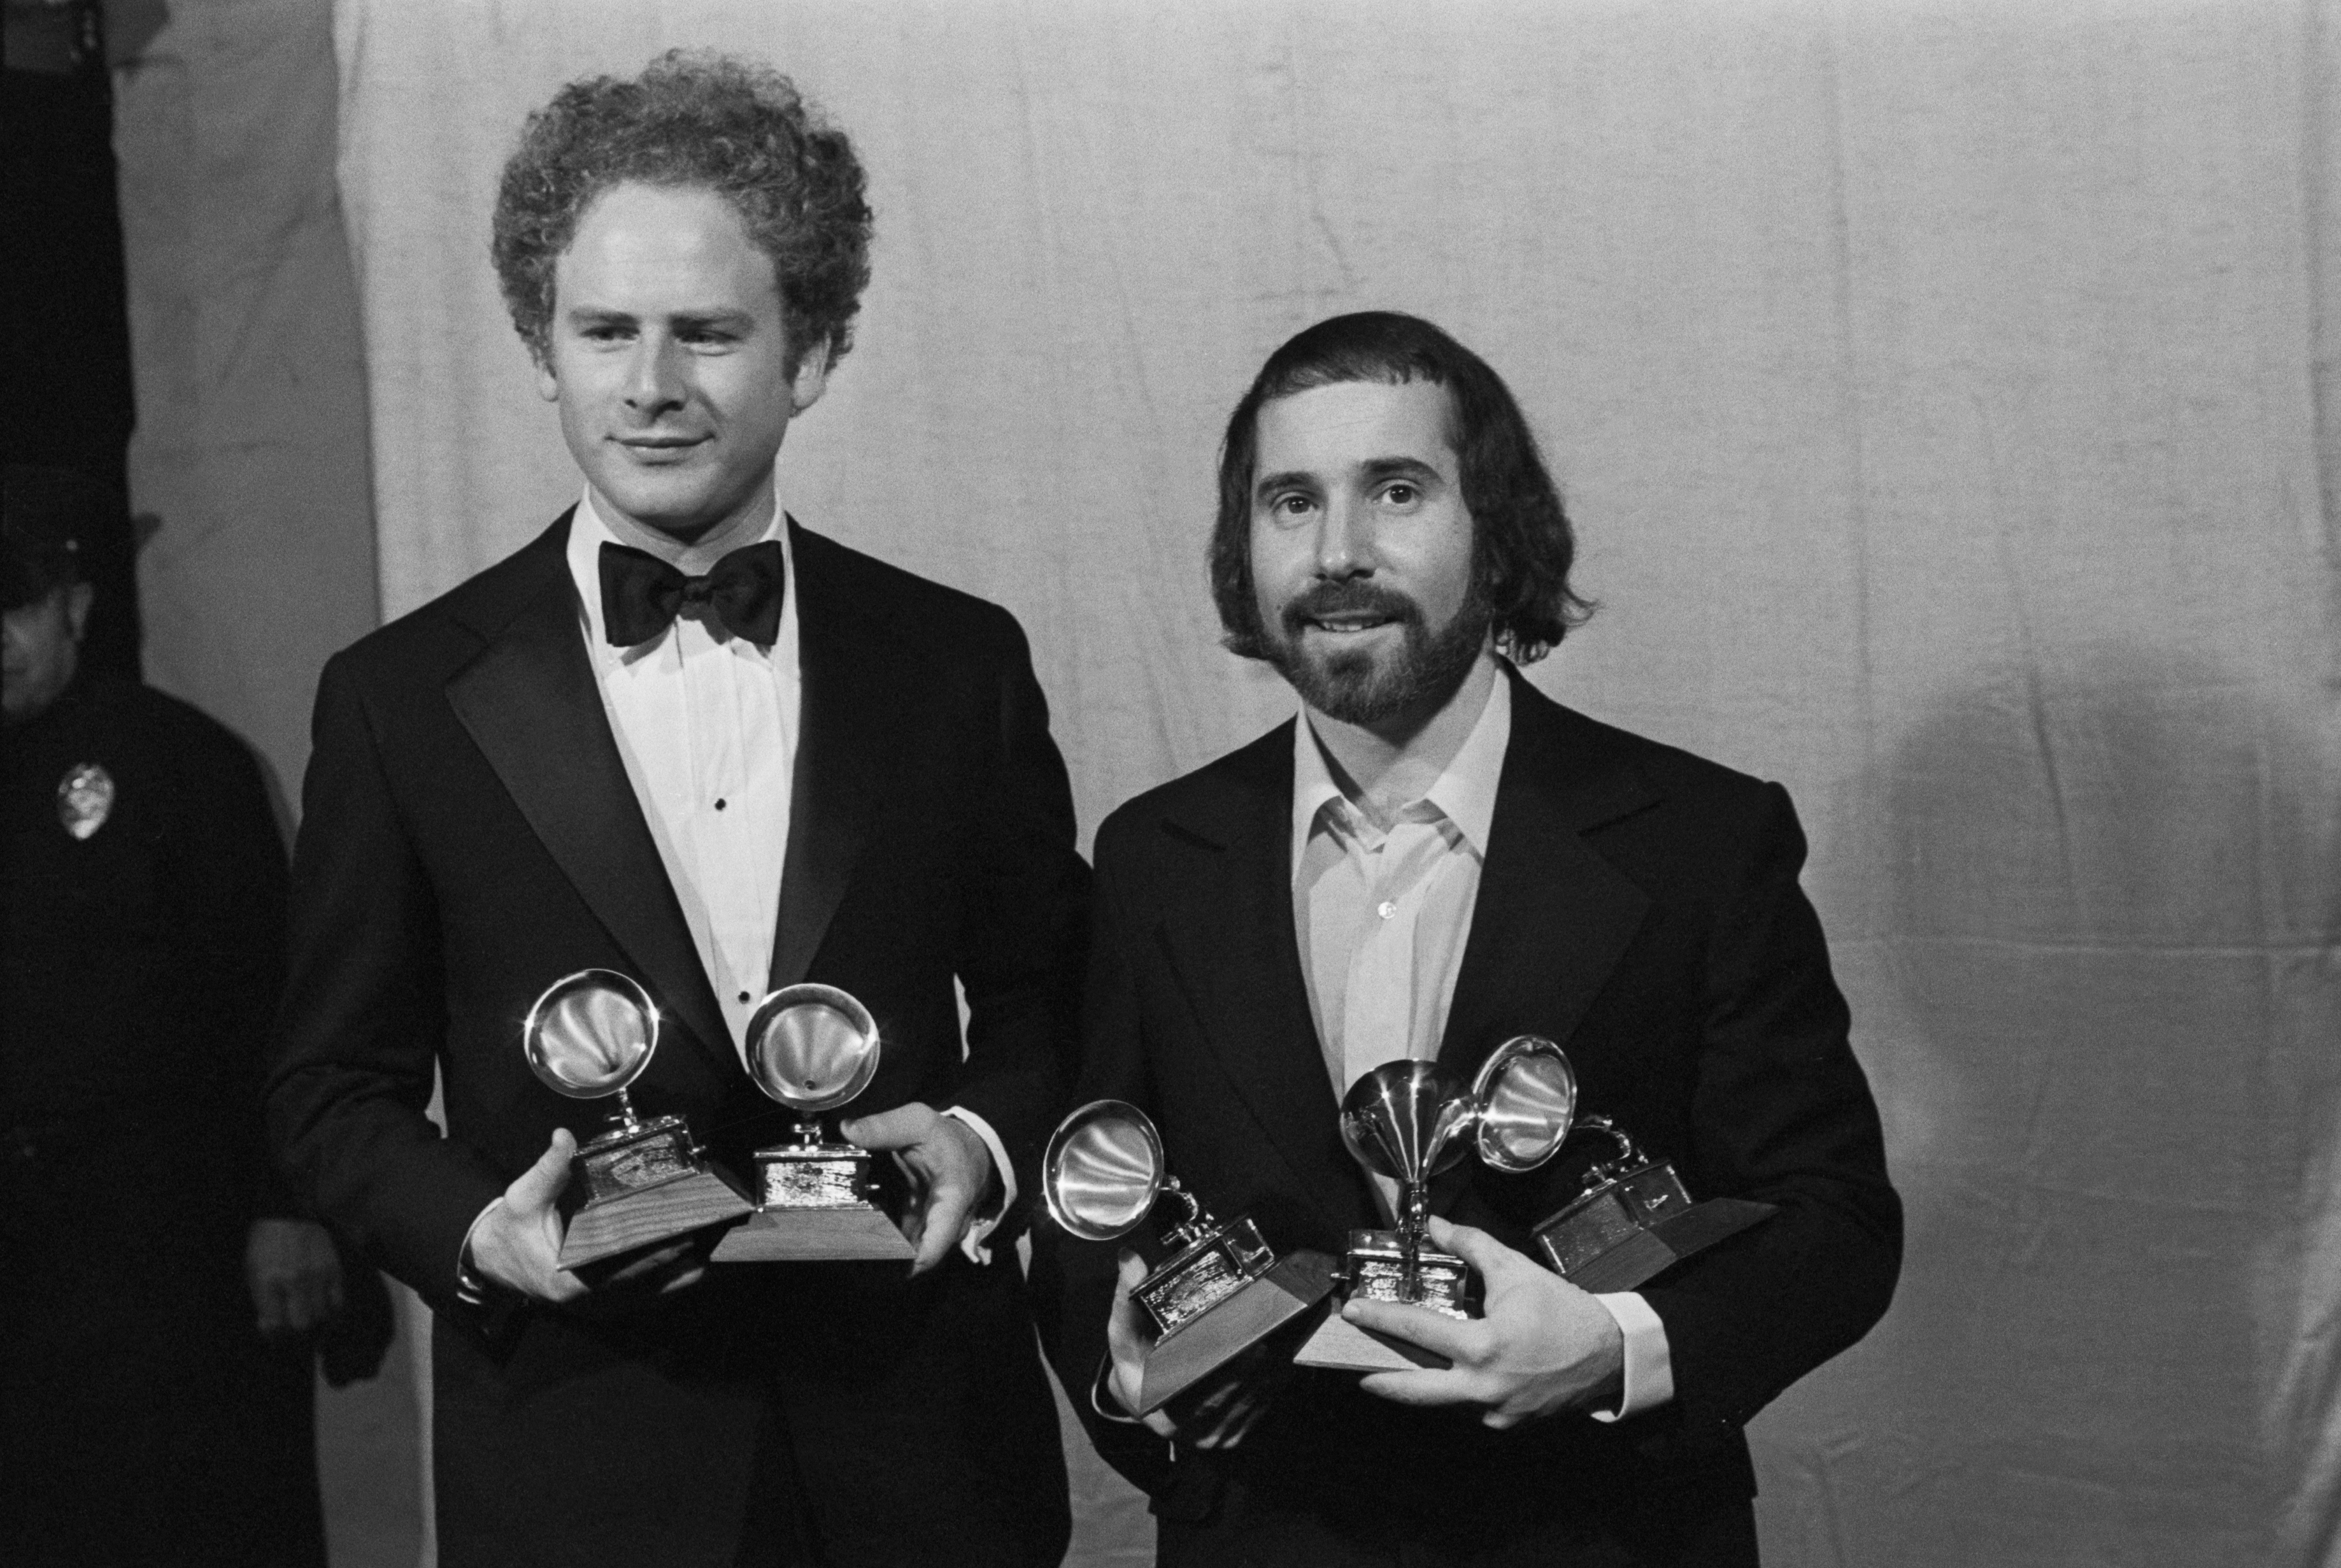 Arthur Garfunkel and Paul Simon hold a "Grammy" for best record and best album of the year for "Bridge Over Troubled Water," in Hollywood California, on May 16, 1971. | Source: Getty Images